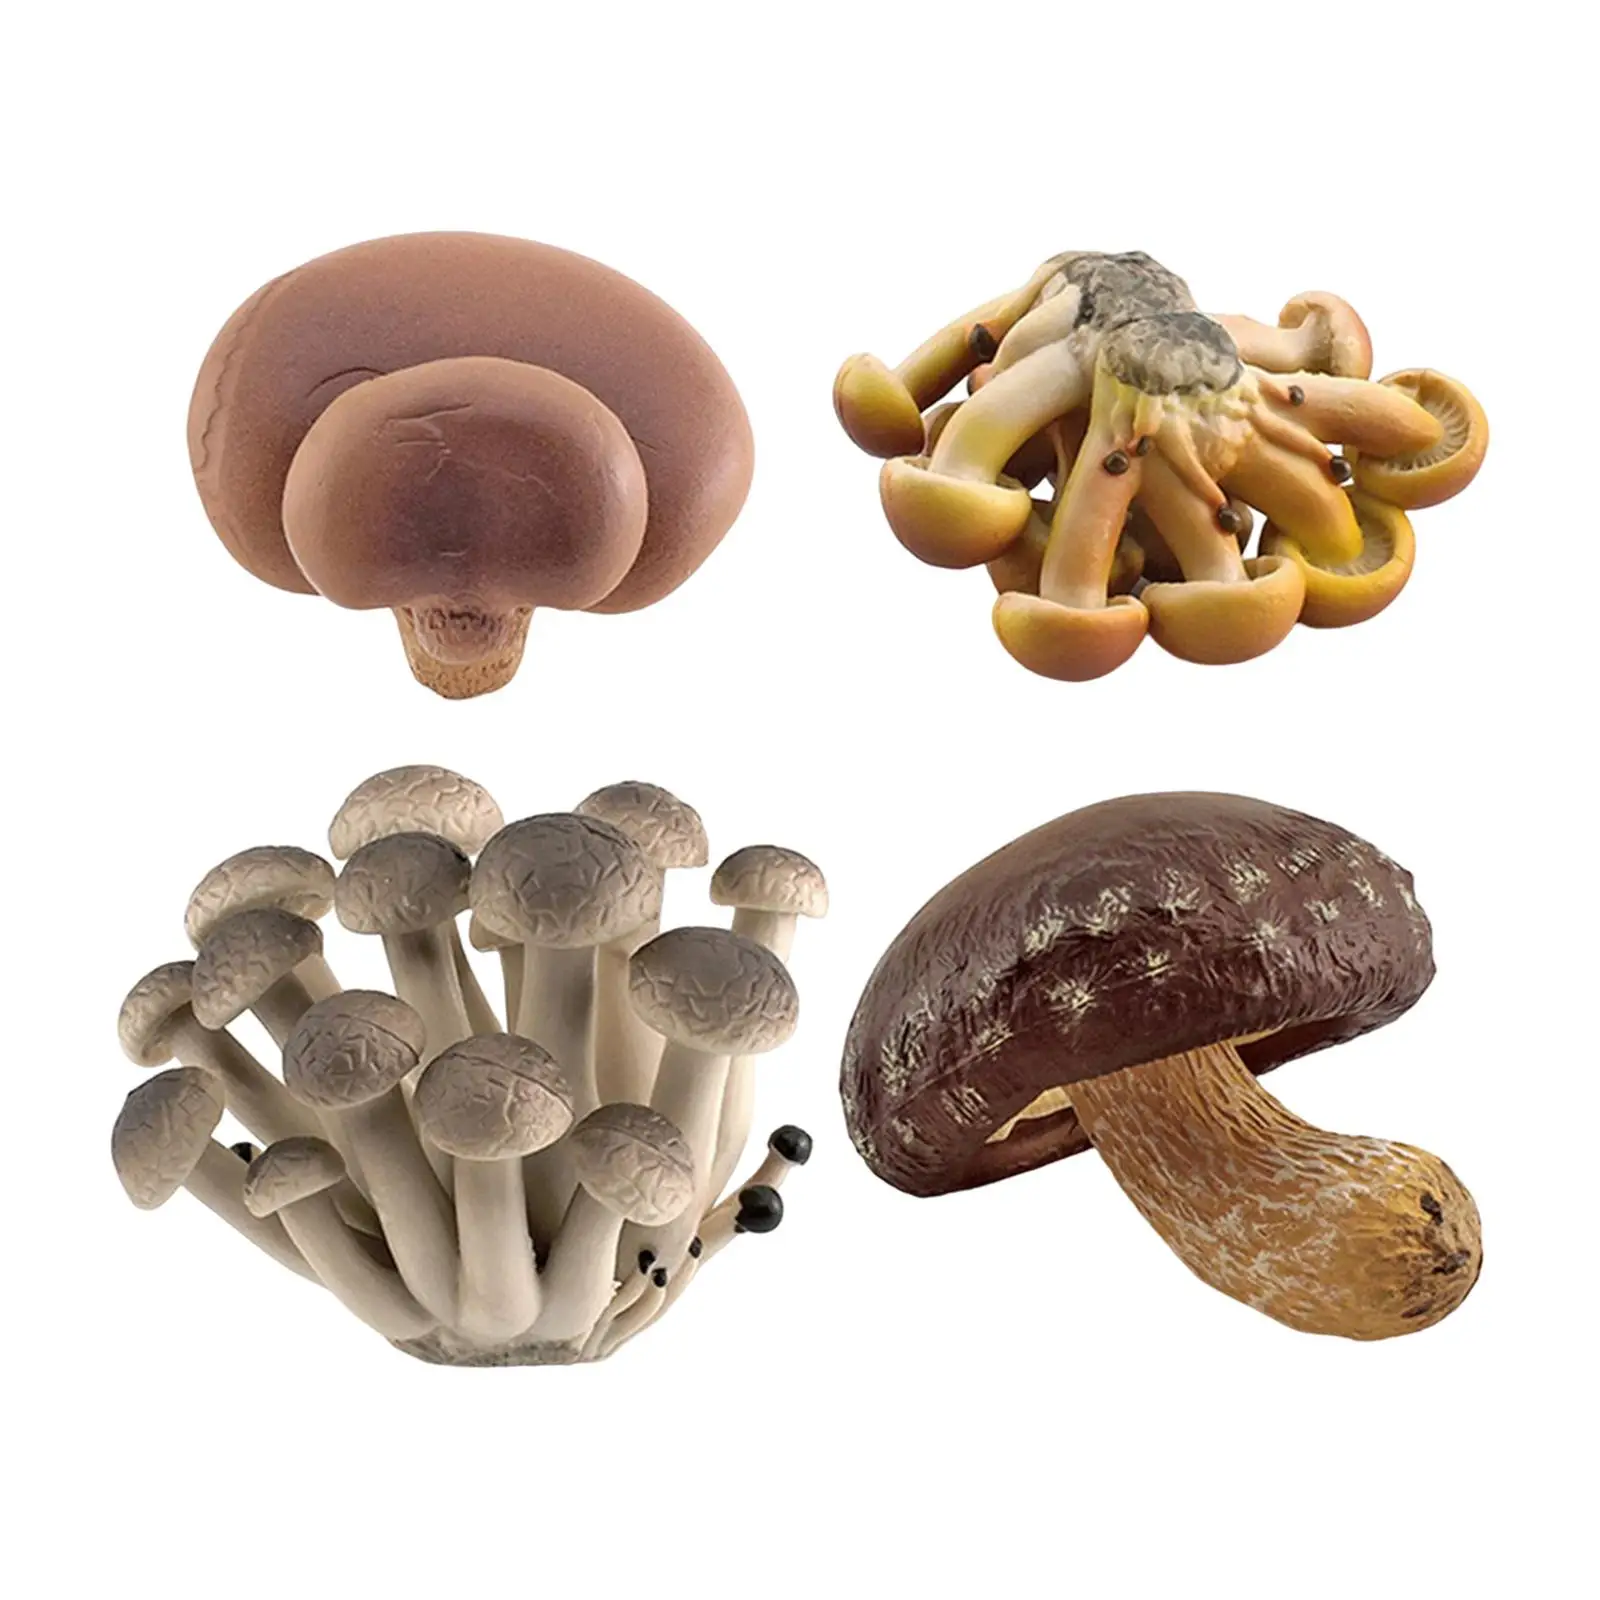 4 Pieces Mushroom Model Educational Toy Vegetable Statues for Girls Boys